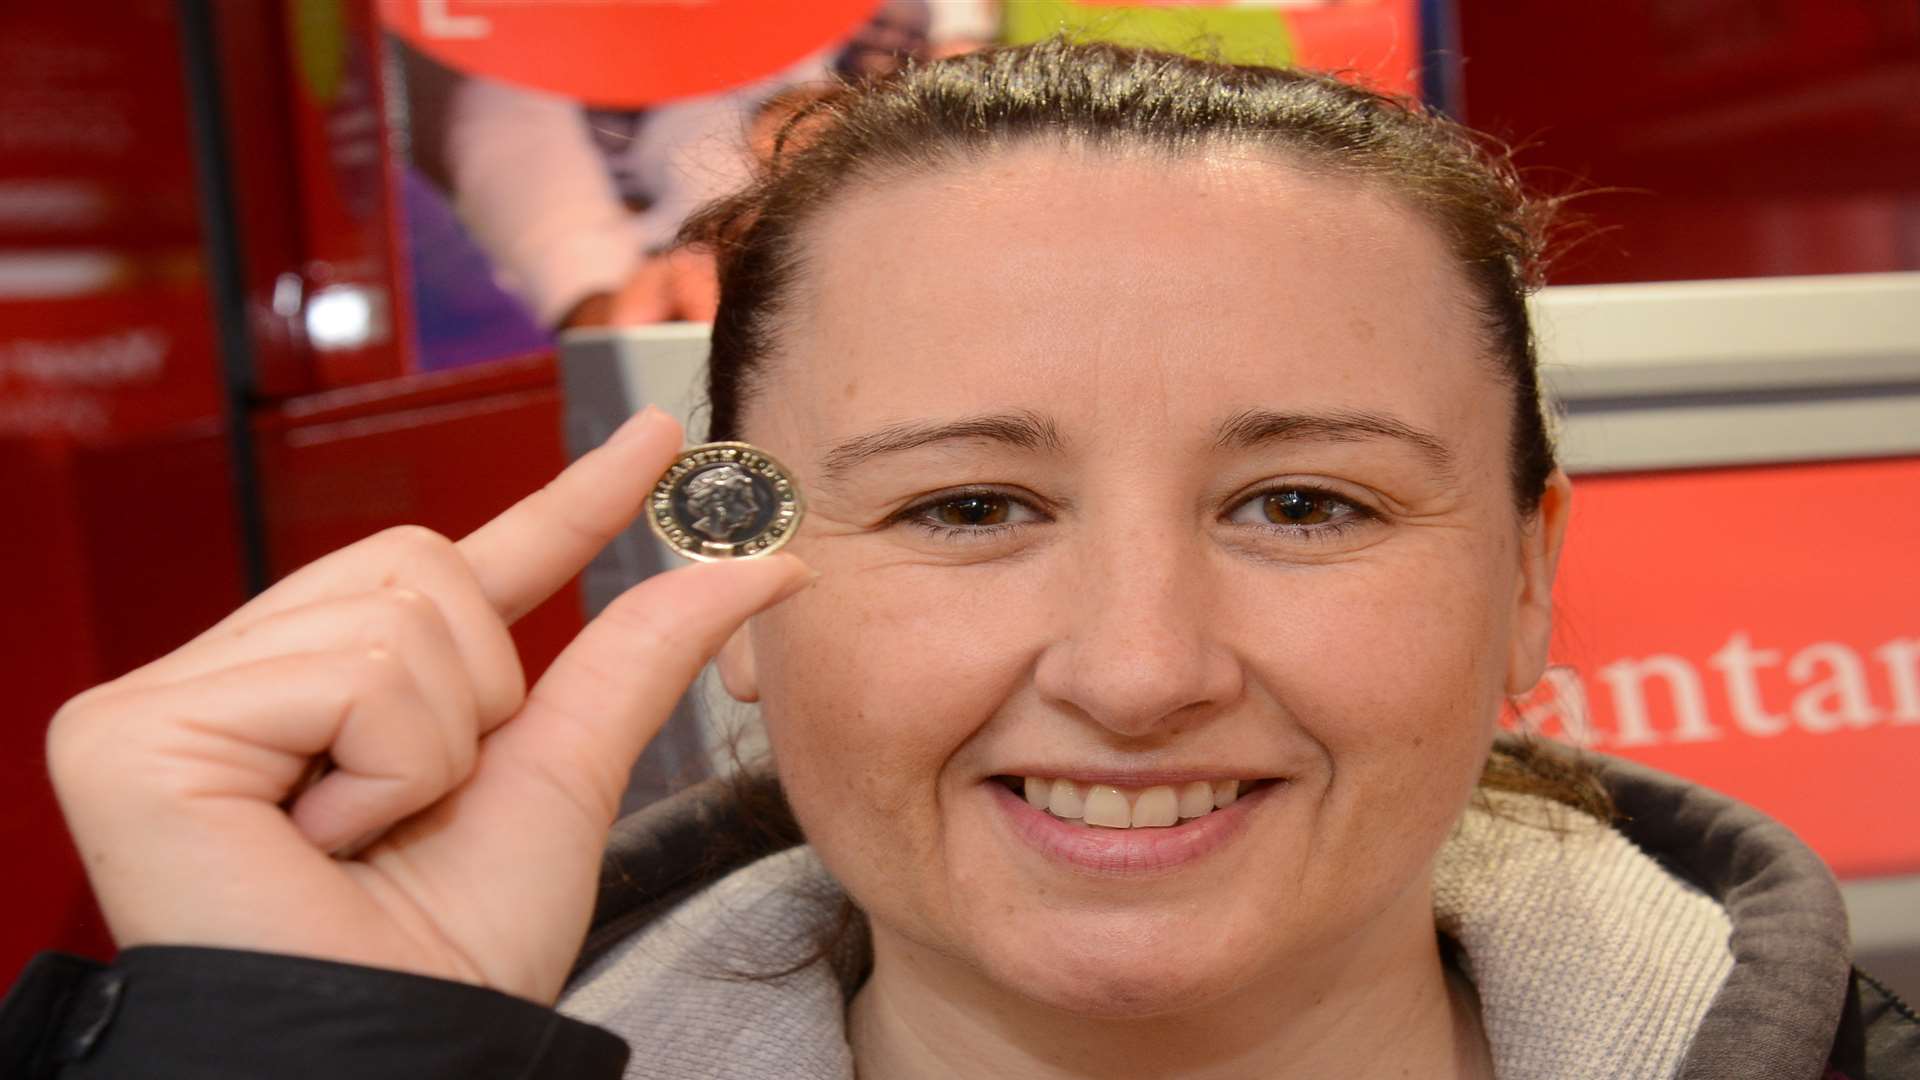 Sara Simpson from Sittingbourne was the first person to get hold of the new pound coin